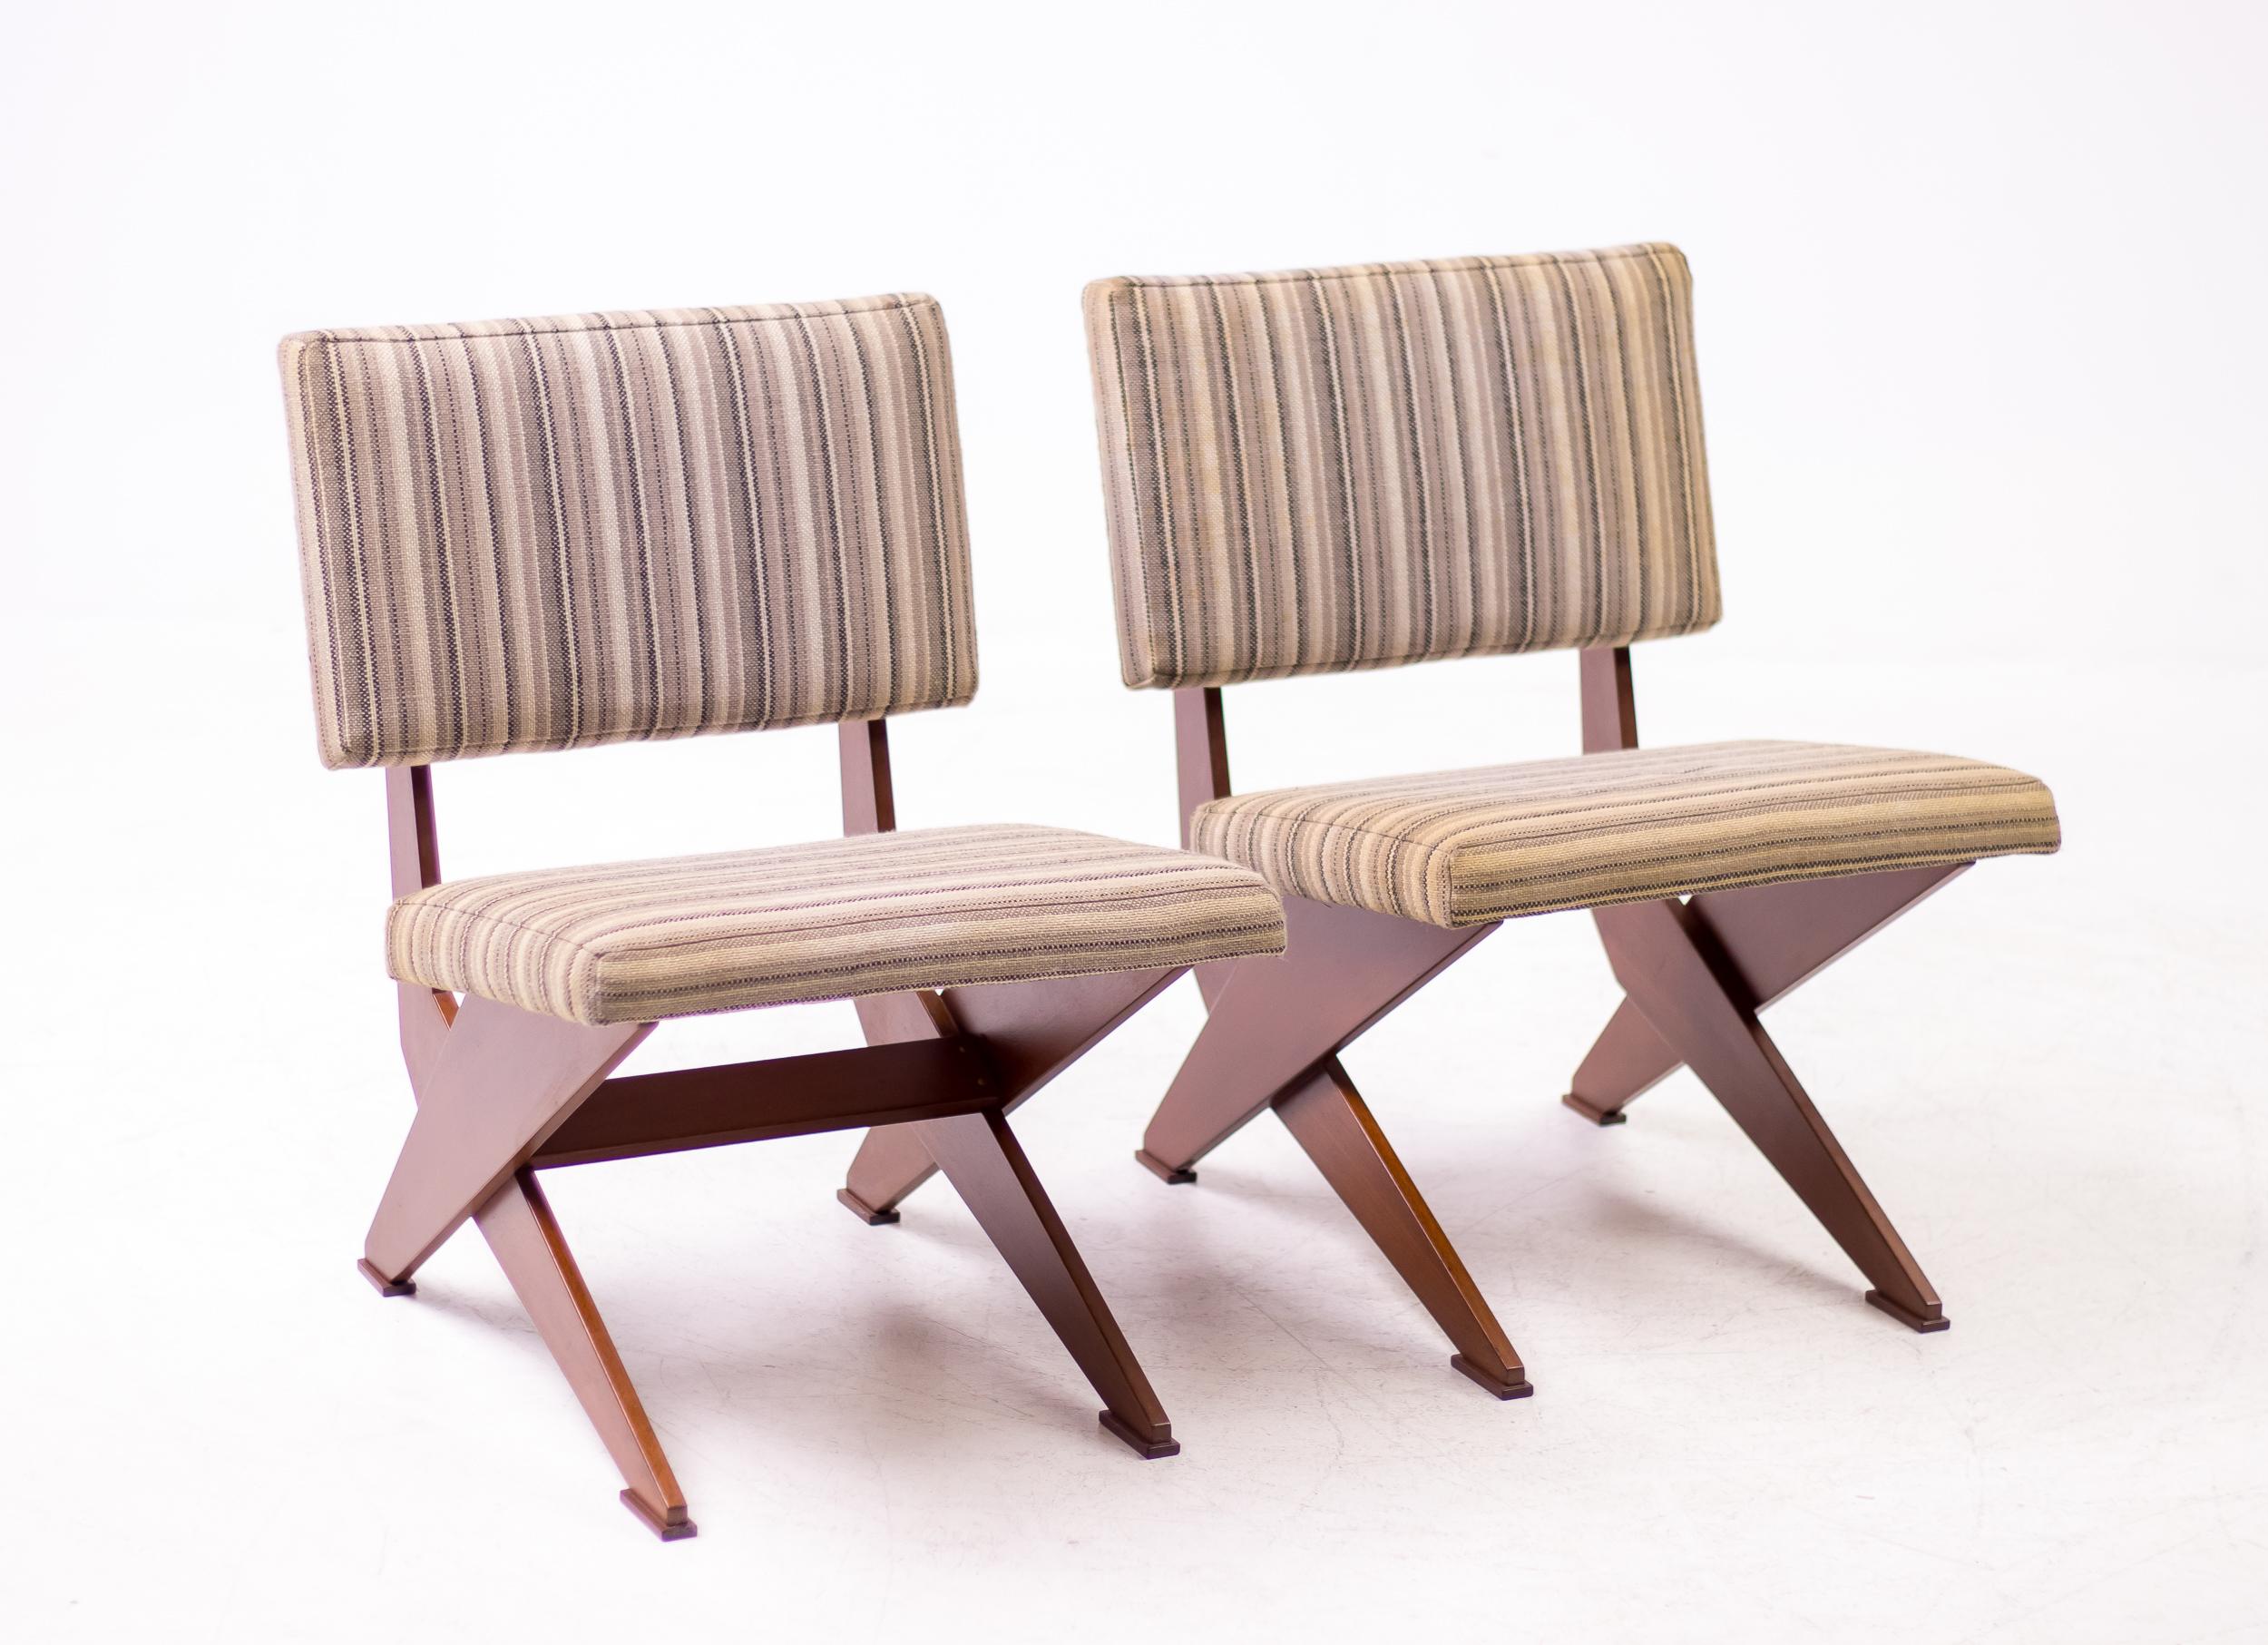 Laminated teak plywood pair of scissor chairs, made in Holland in 1958.
More recent upholstery in very good condition.
When needed, re-upholstery is available upon request.
Priced as a pair.